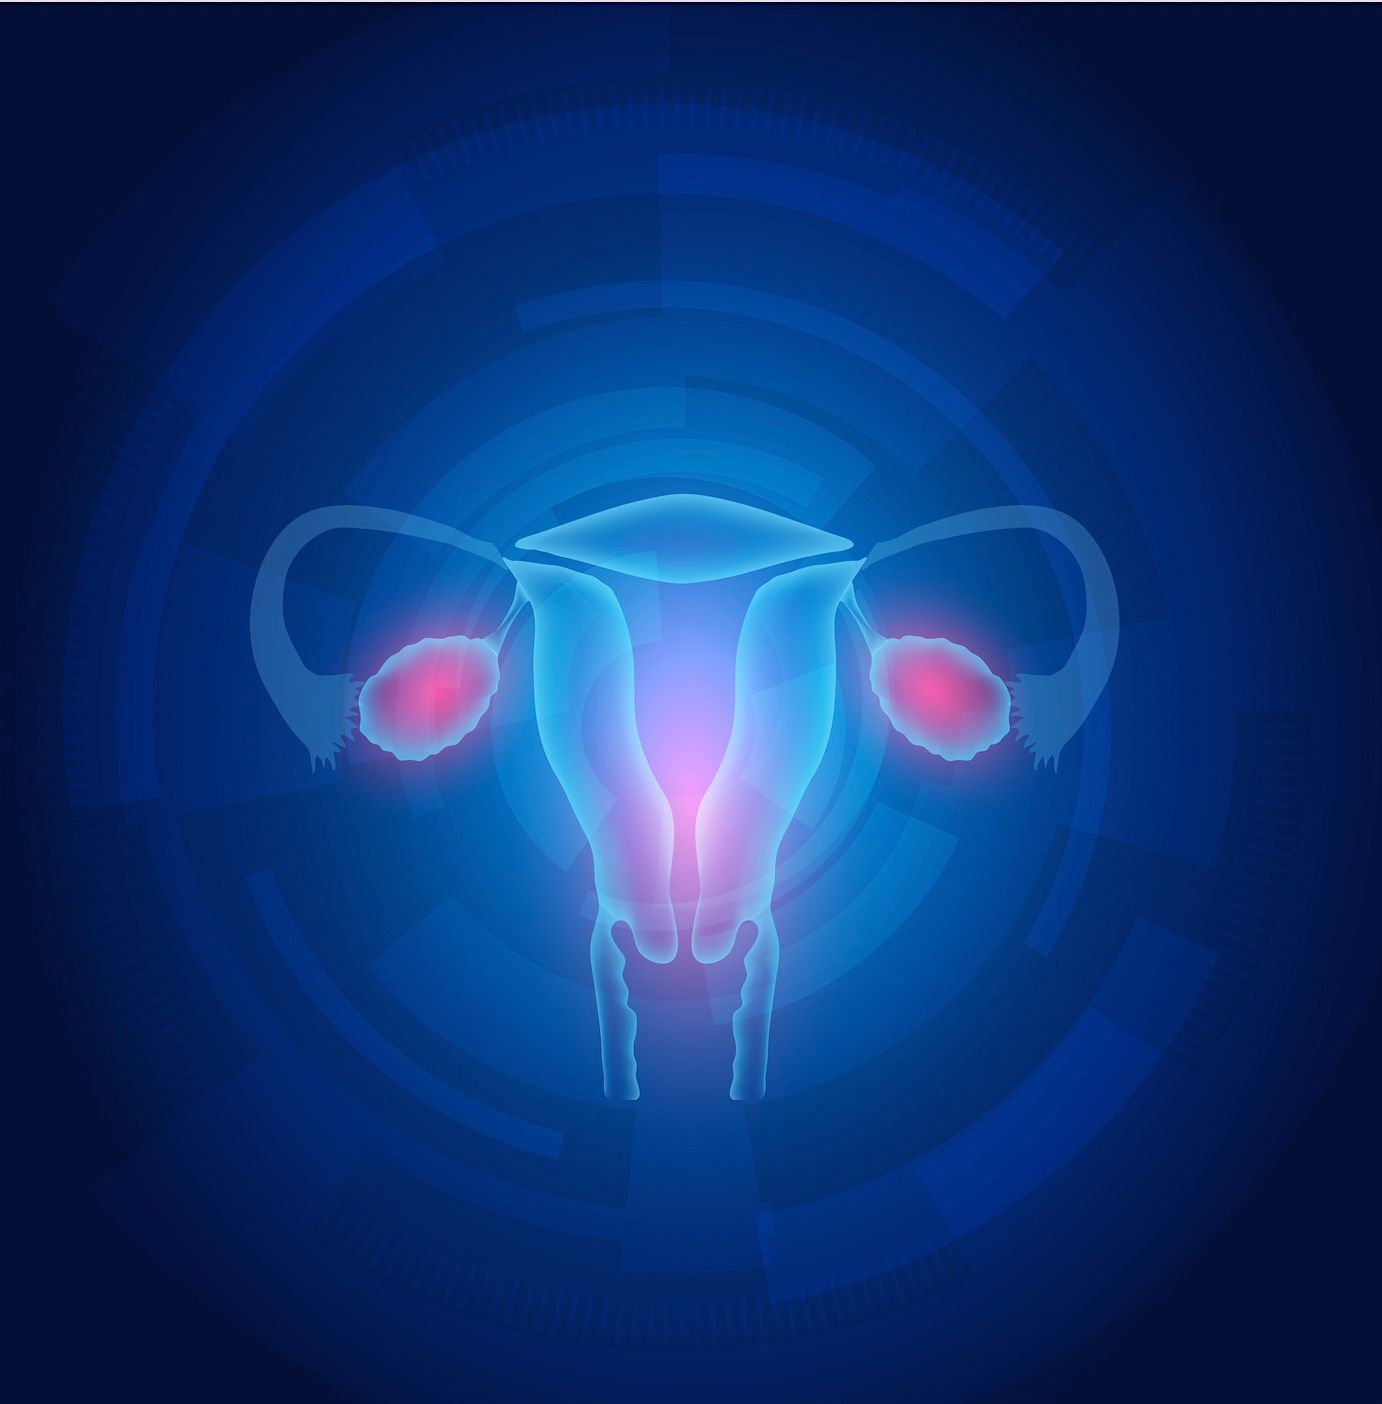 Ovarian Cancer Treatment Update and Pharmacists' Role